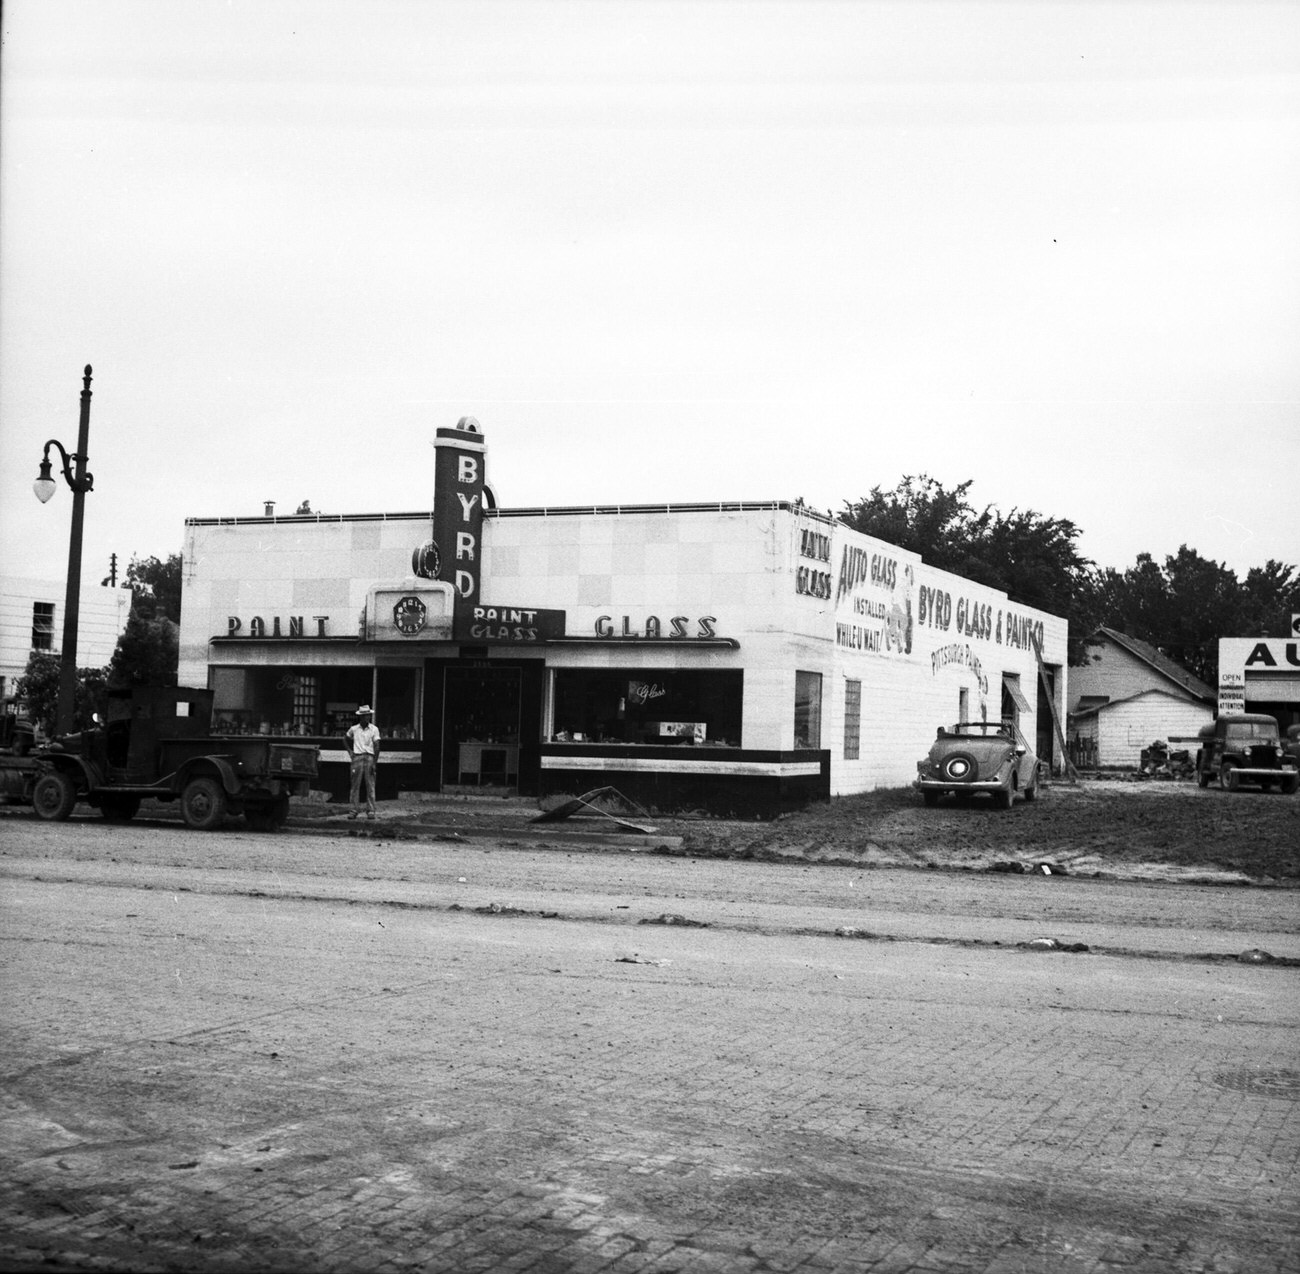 The Byrd Glass & Paint storefront after the 1949 Fort Worth flood.